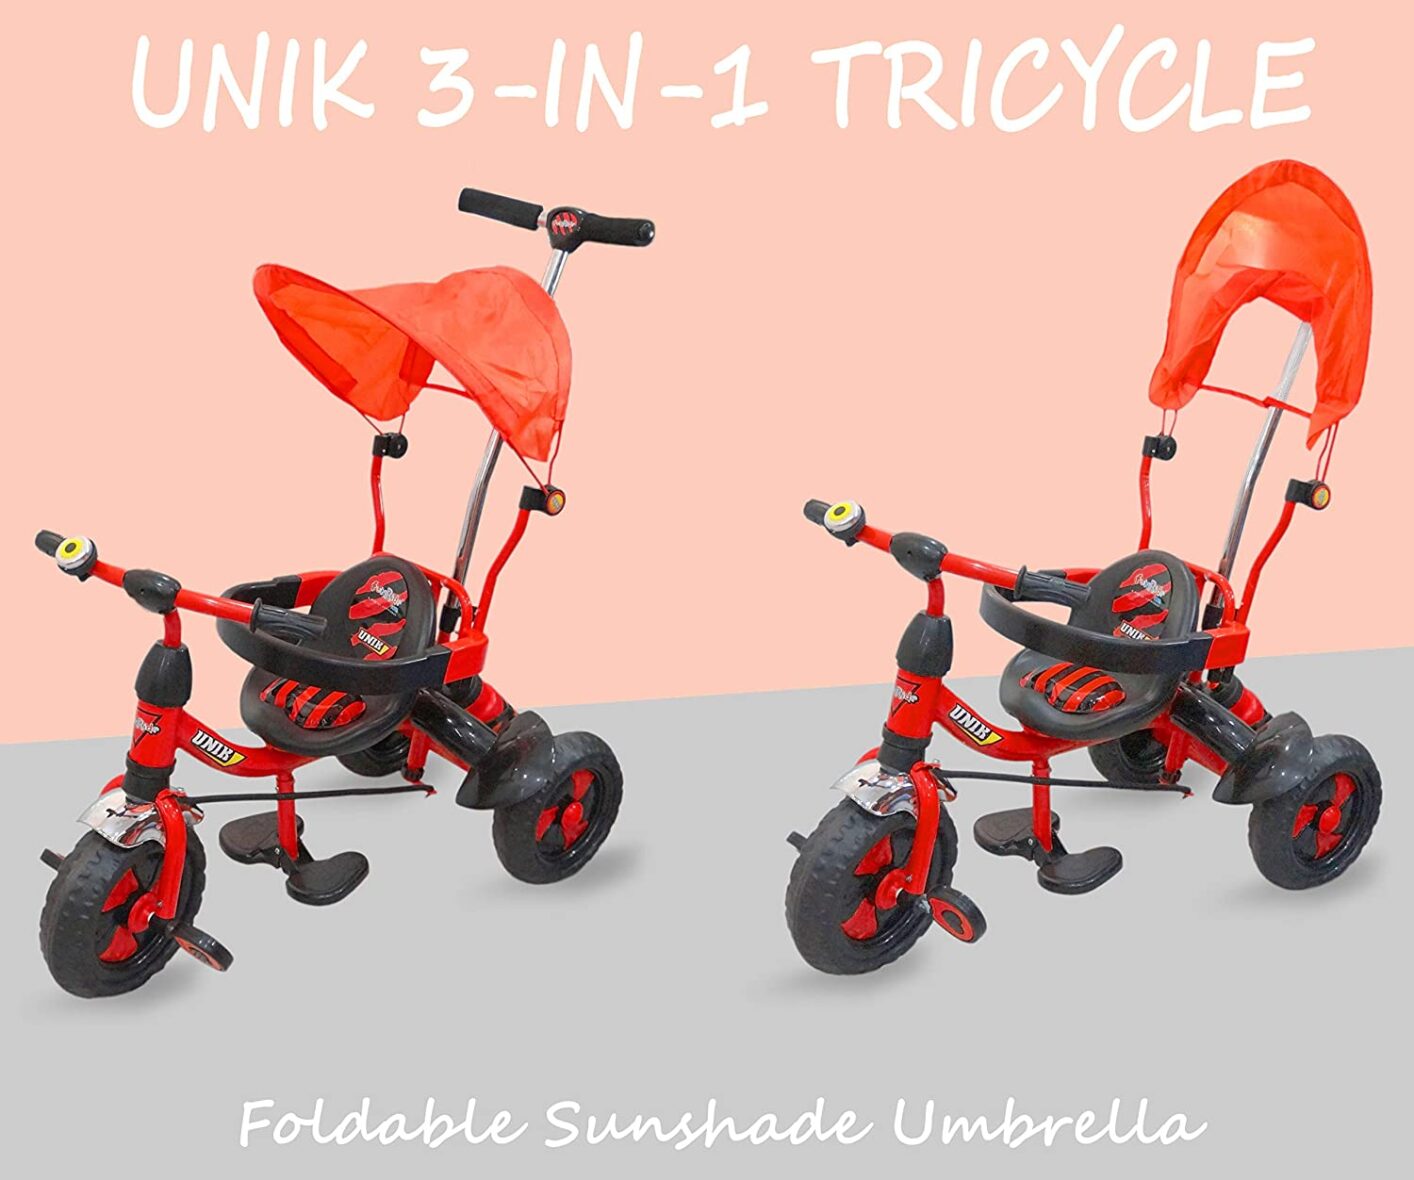 Fun Ride Baby Tricycle Unik Deluxe Rider 1 to 4 Years (12)